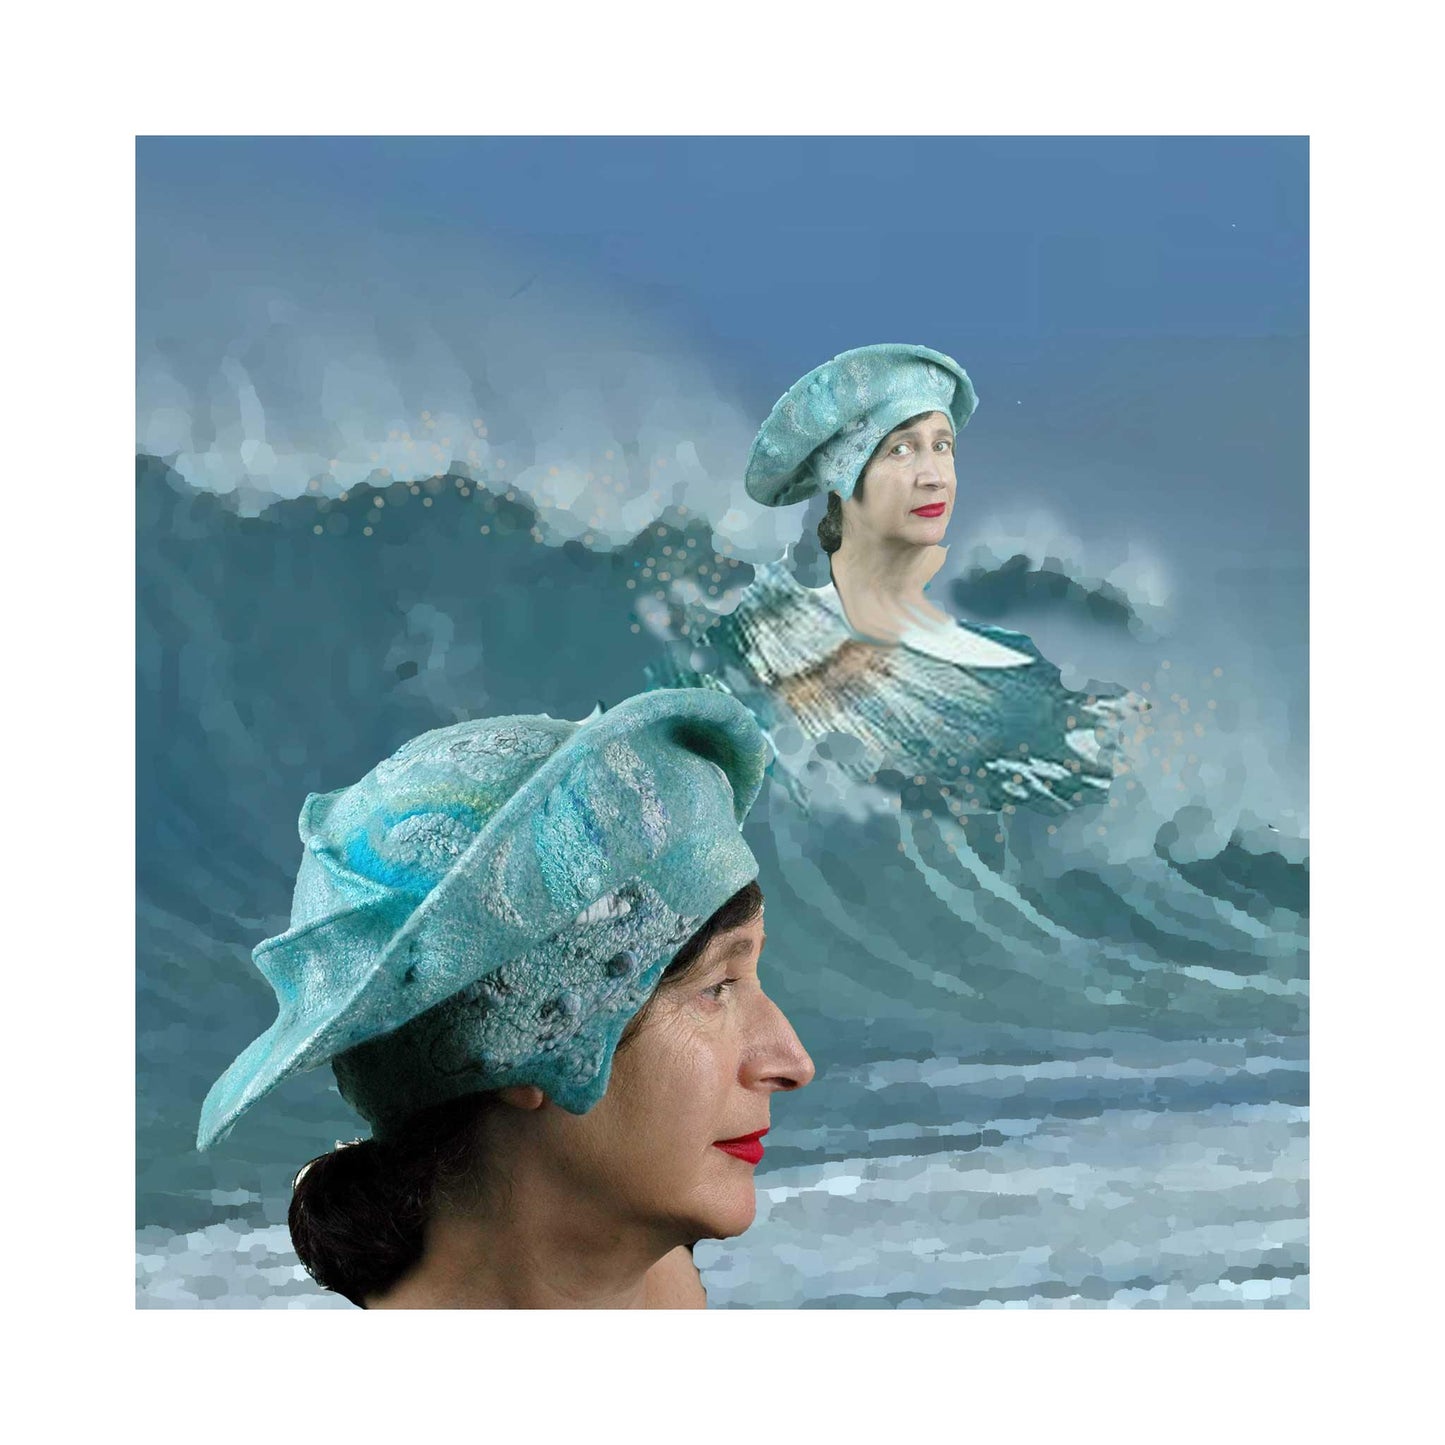 Digital Collage of Hat Surfing against a wave.